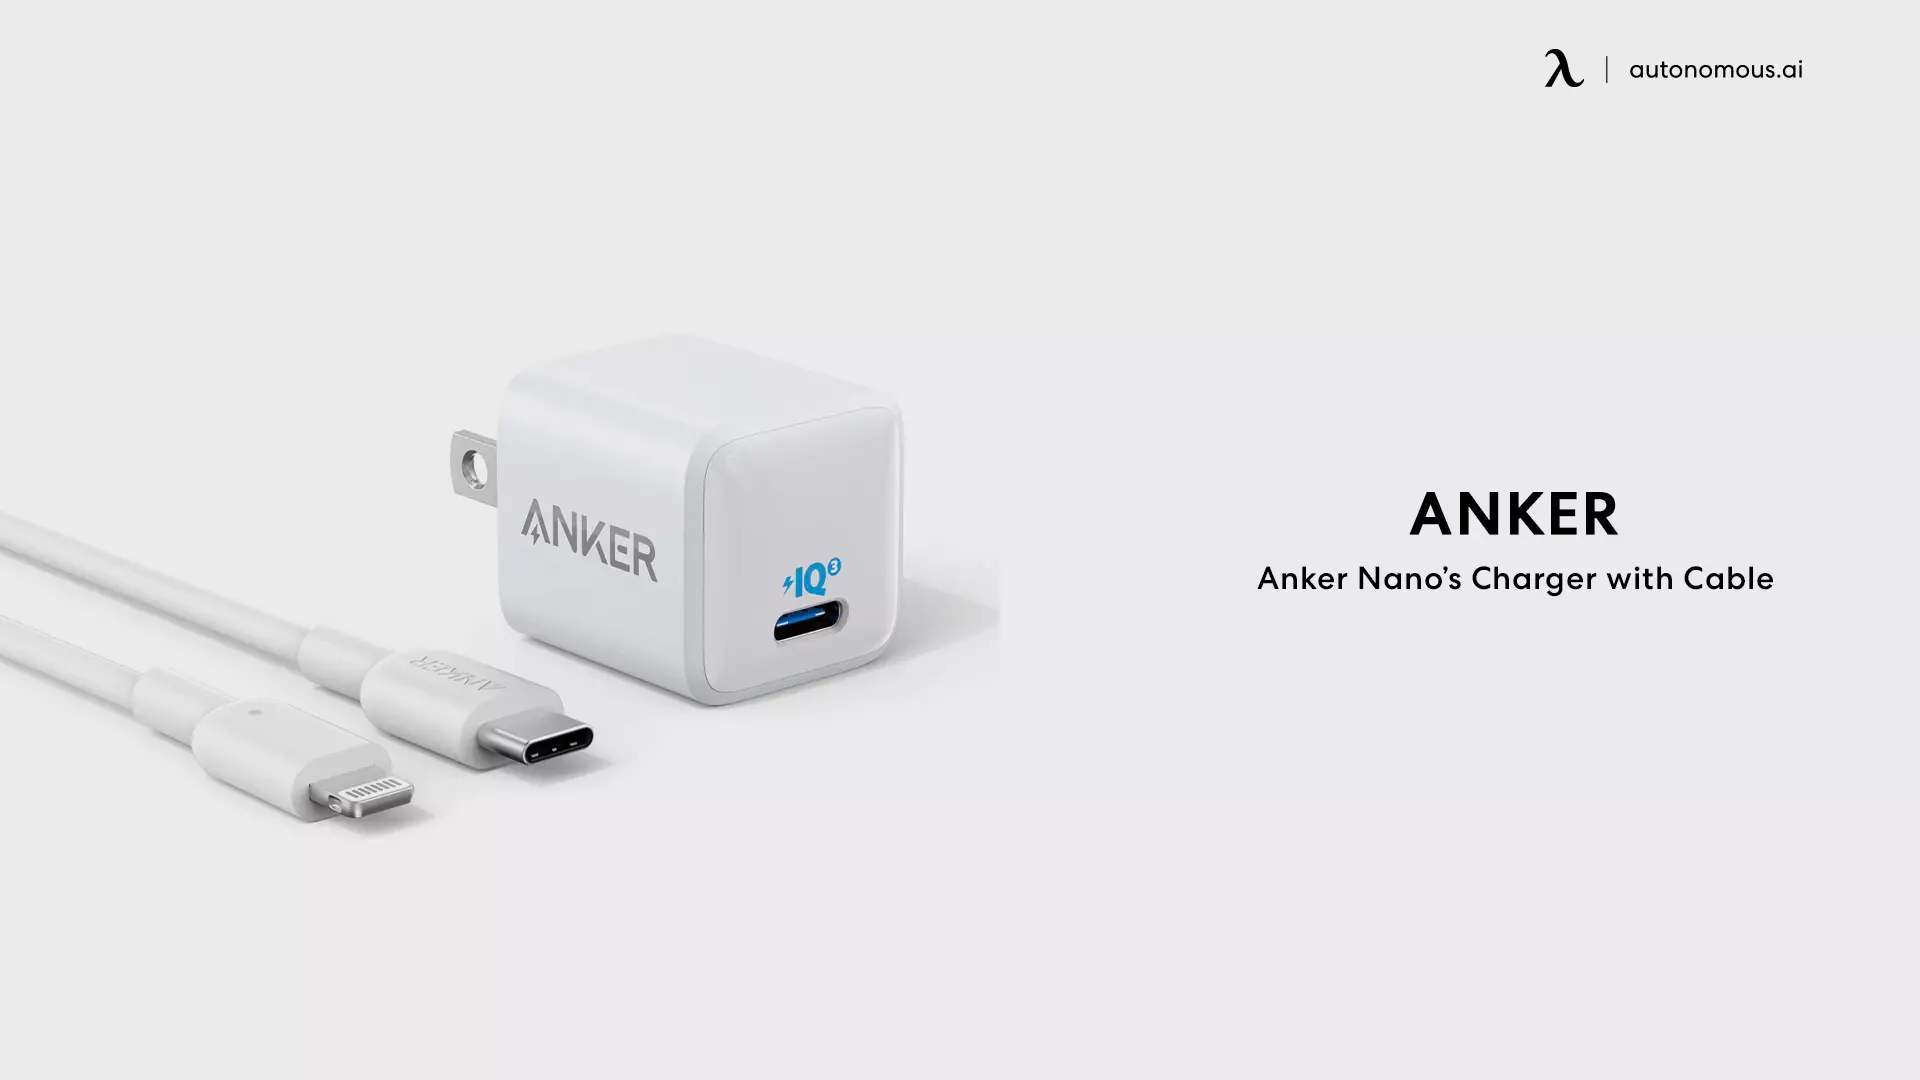 Anker Nano’s Charger with Cable